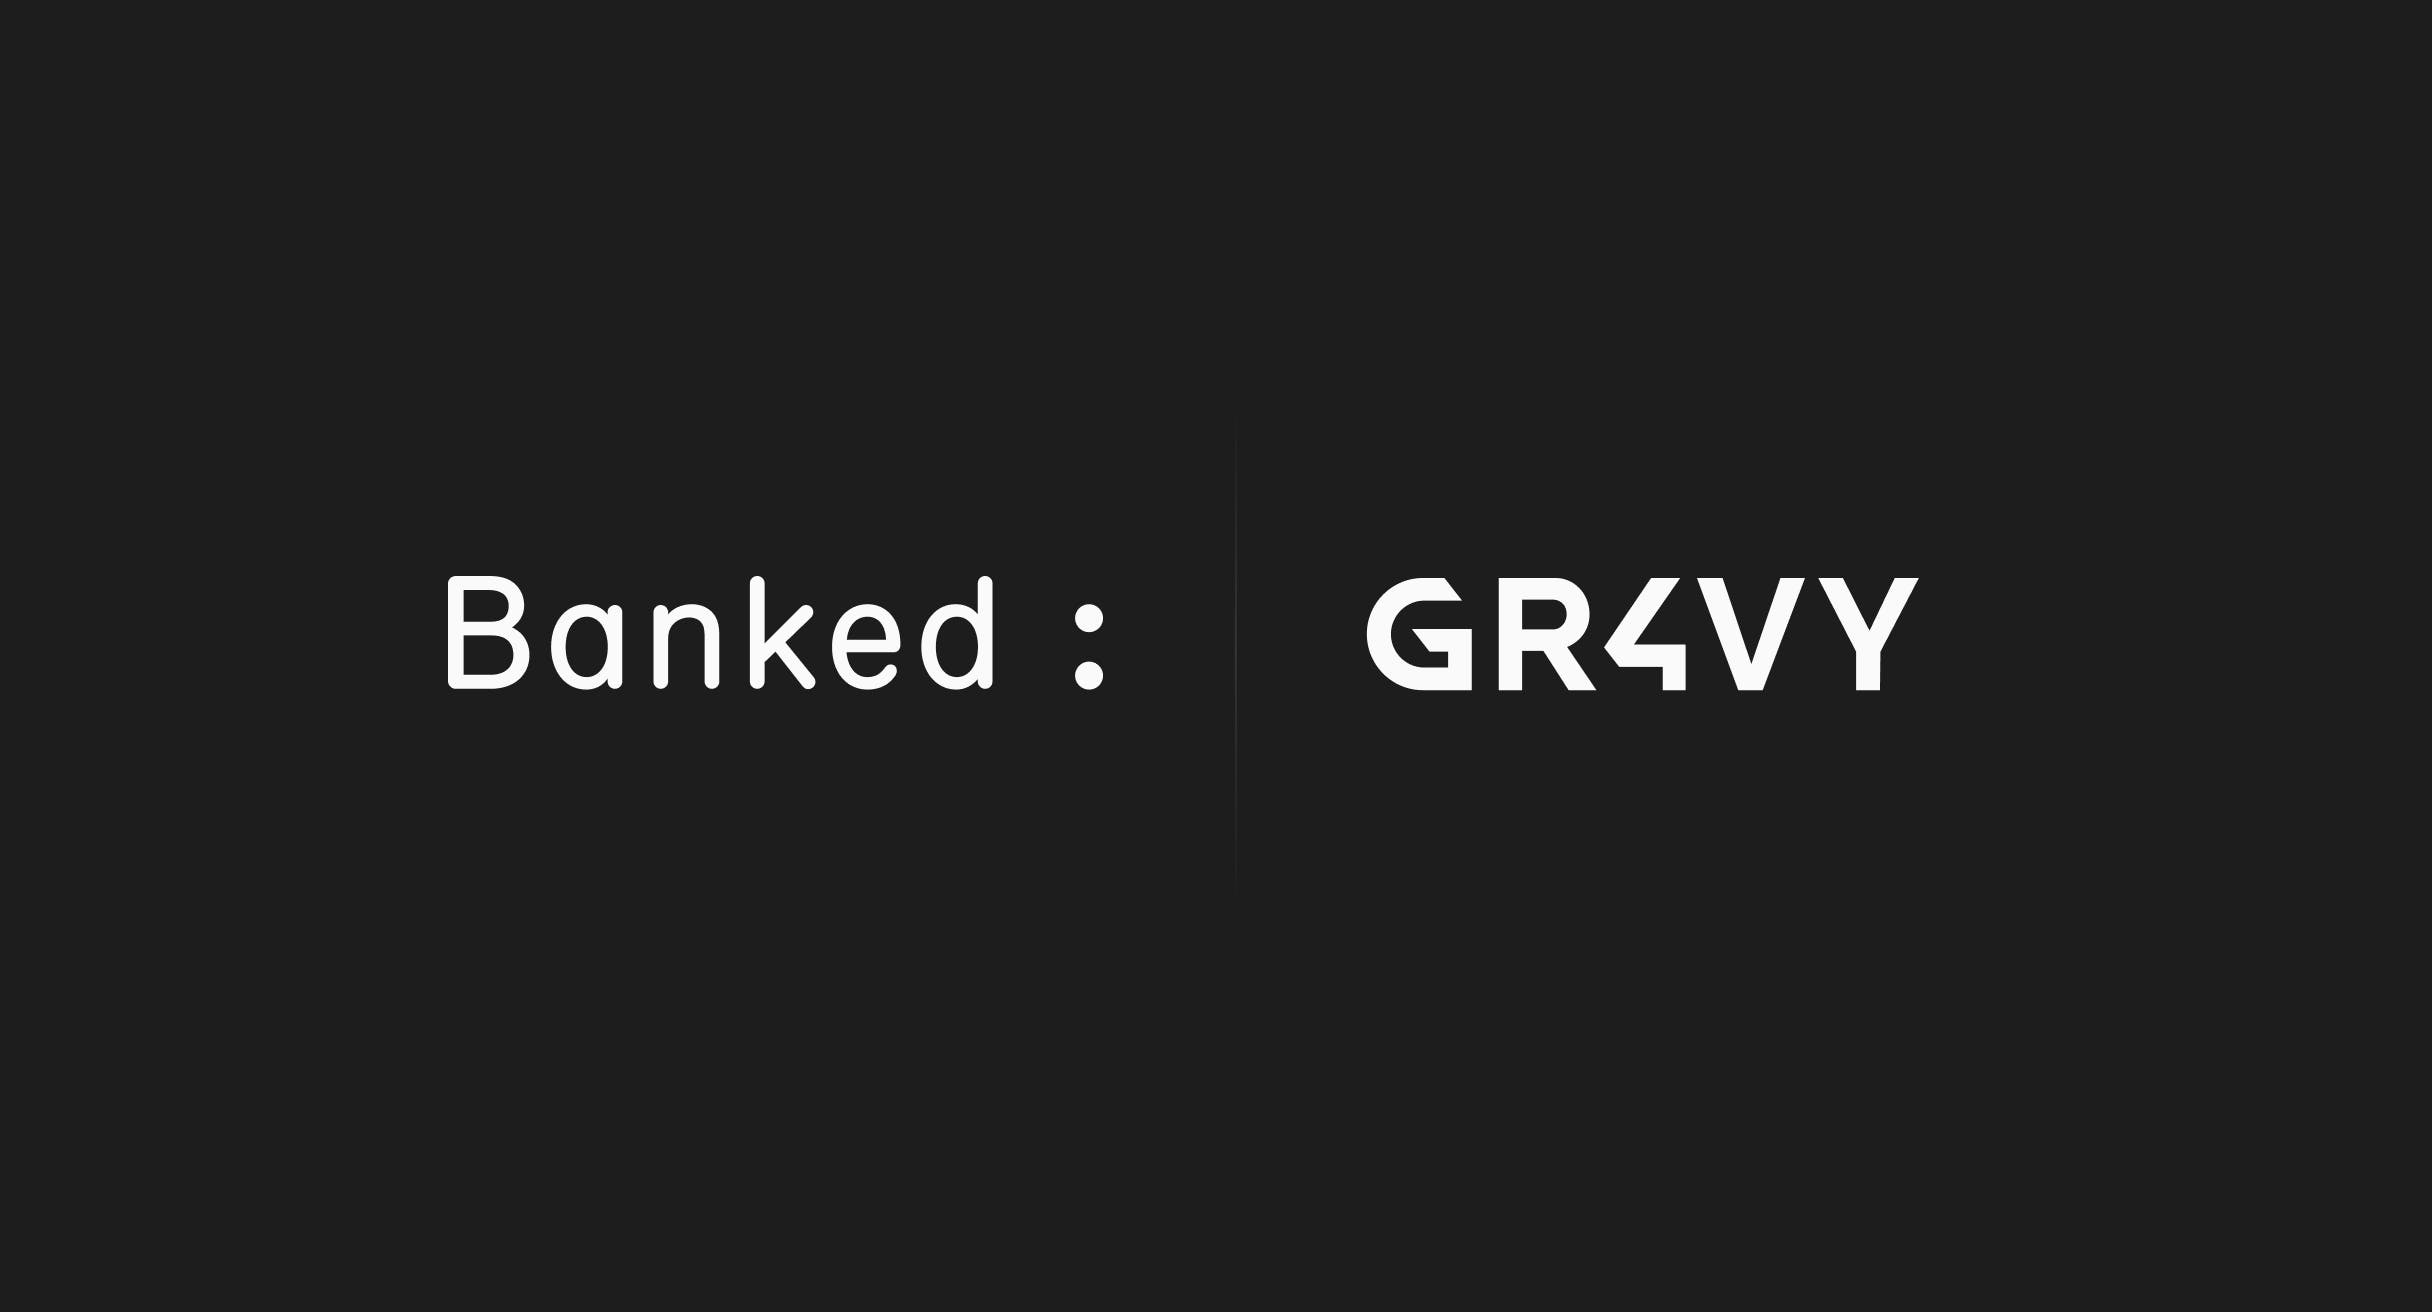 Banked partners with Gr4vy and GoCardless to deliver merchants’ customers new ways to pay